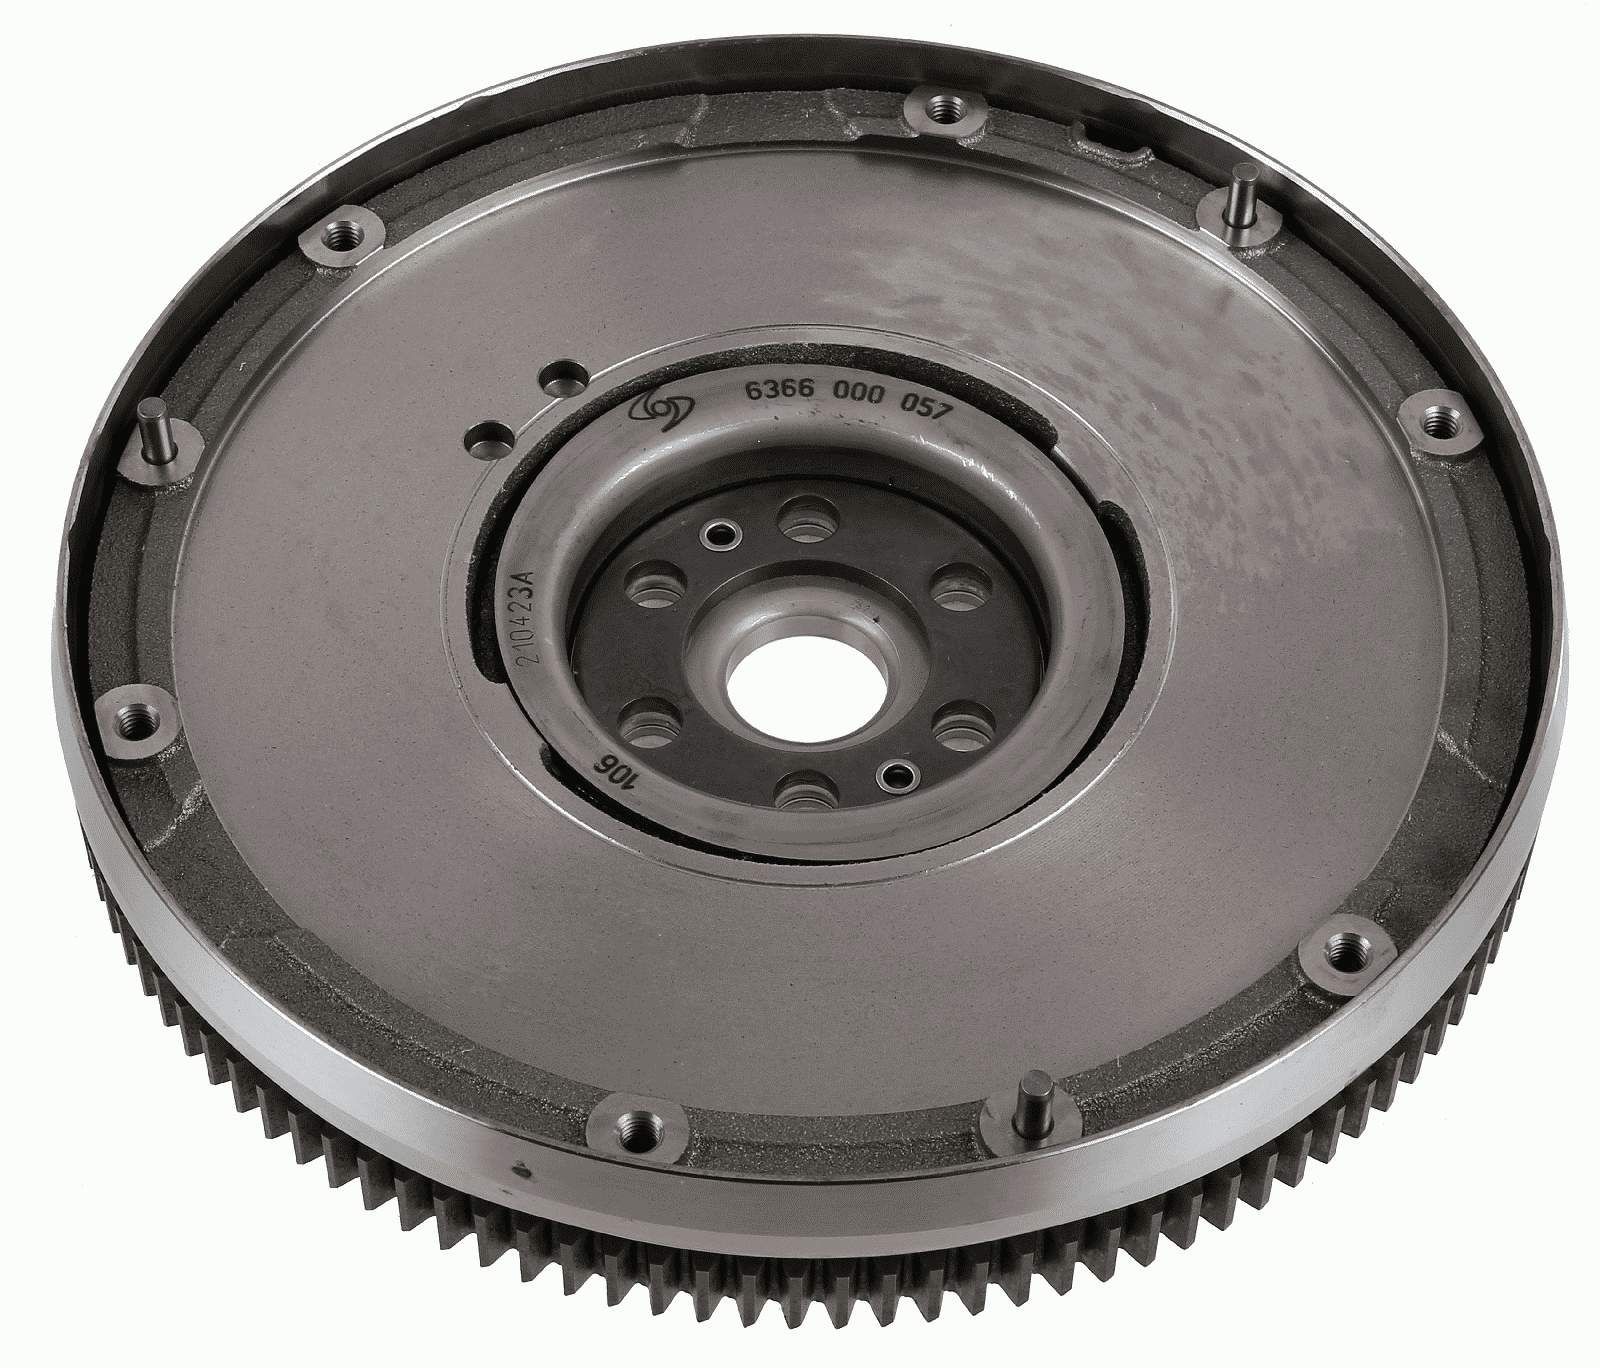 Clutch flywheel 6366000057 Ford FOCUS 2016 – buy replacement parts